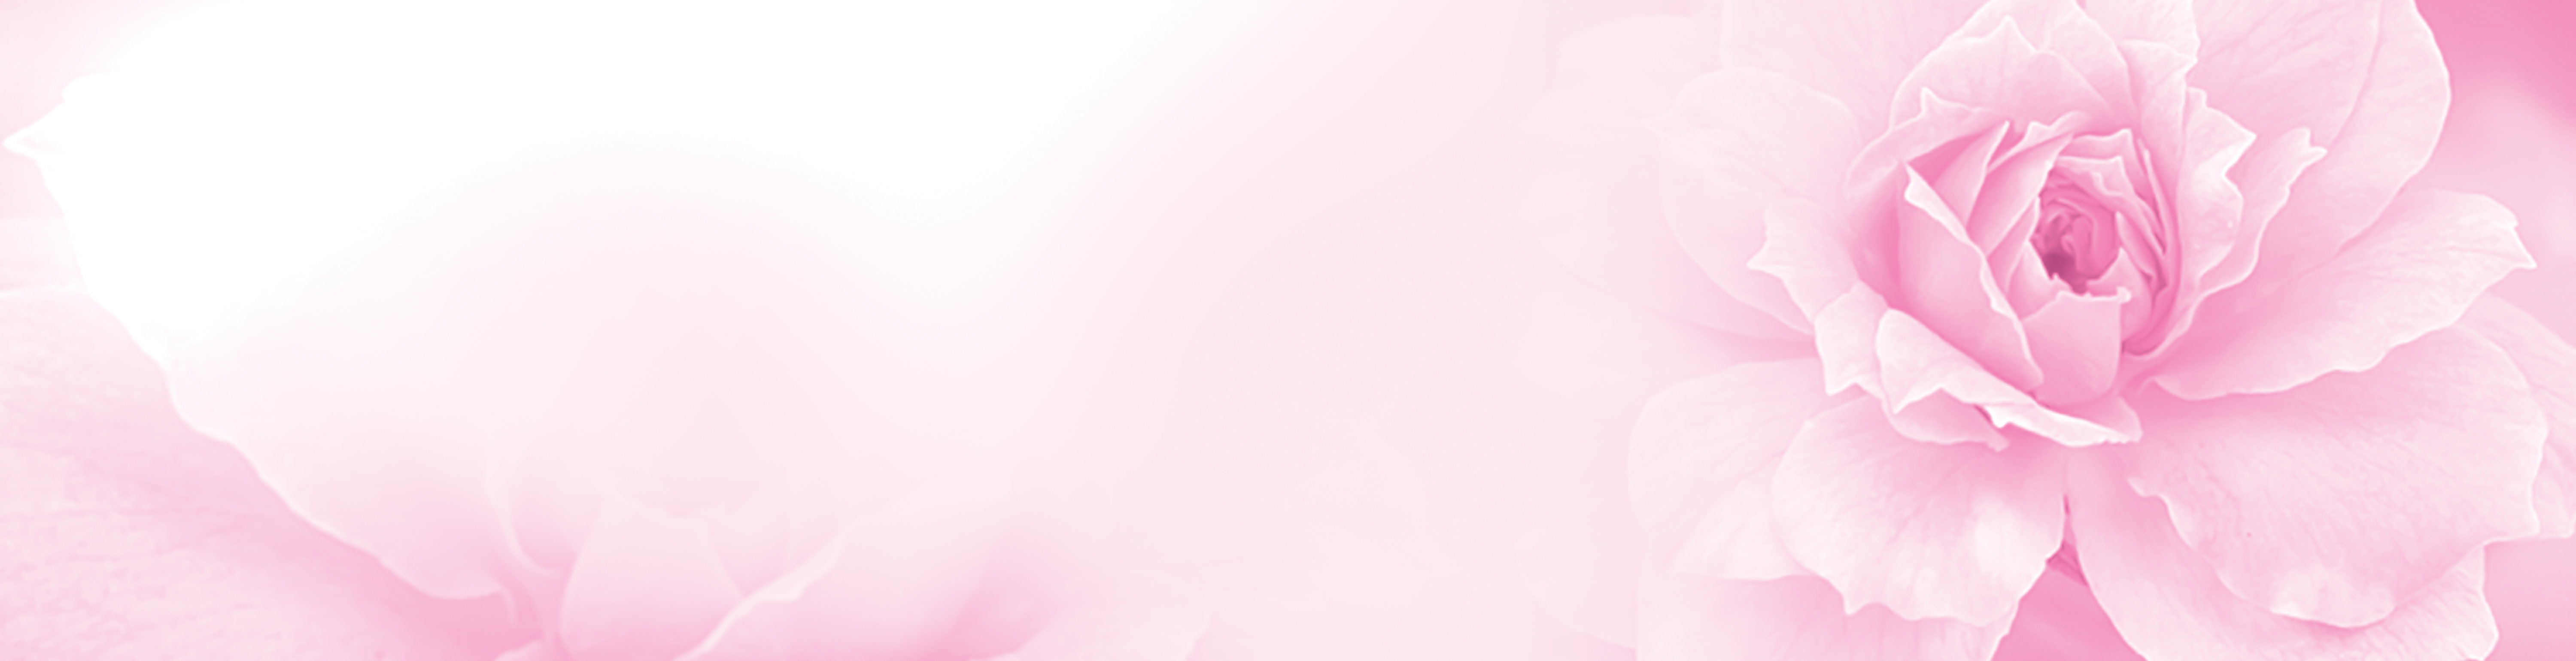 Pink Rose Background Stock Photos, Images and Backgrounds for Free Download